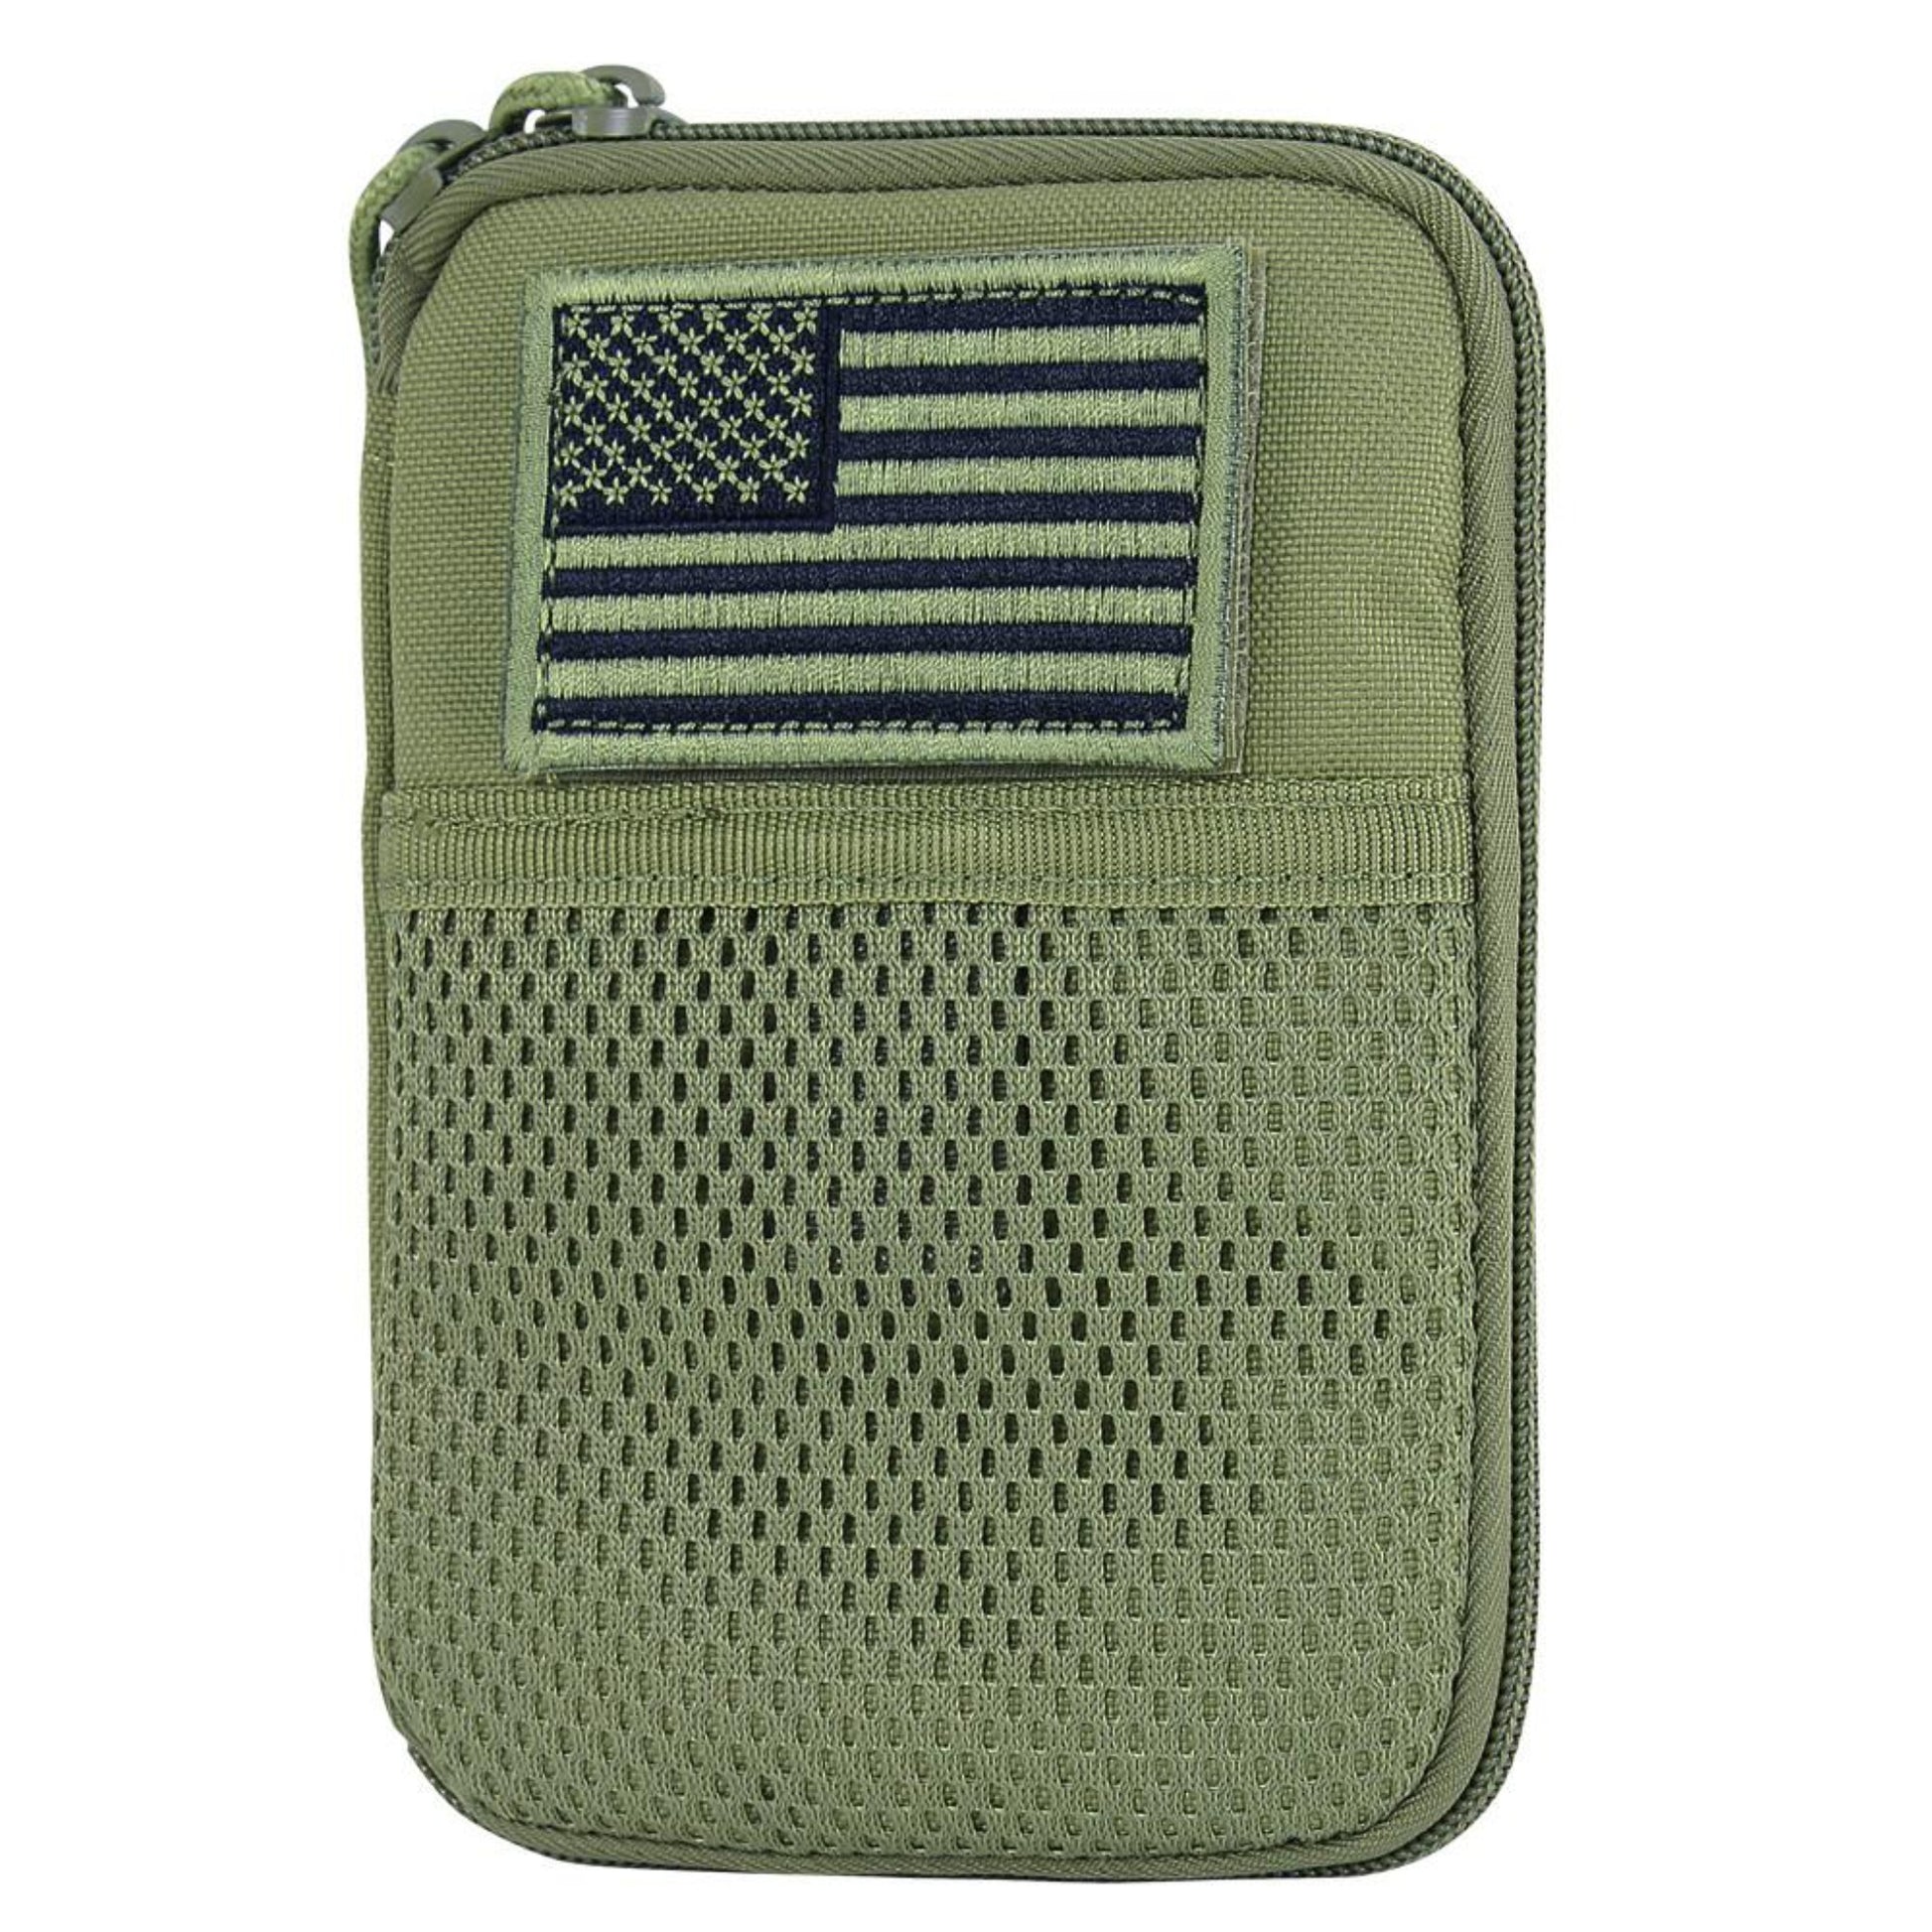 Green Pocket Pouch with USA flag patch.